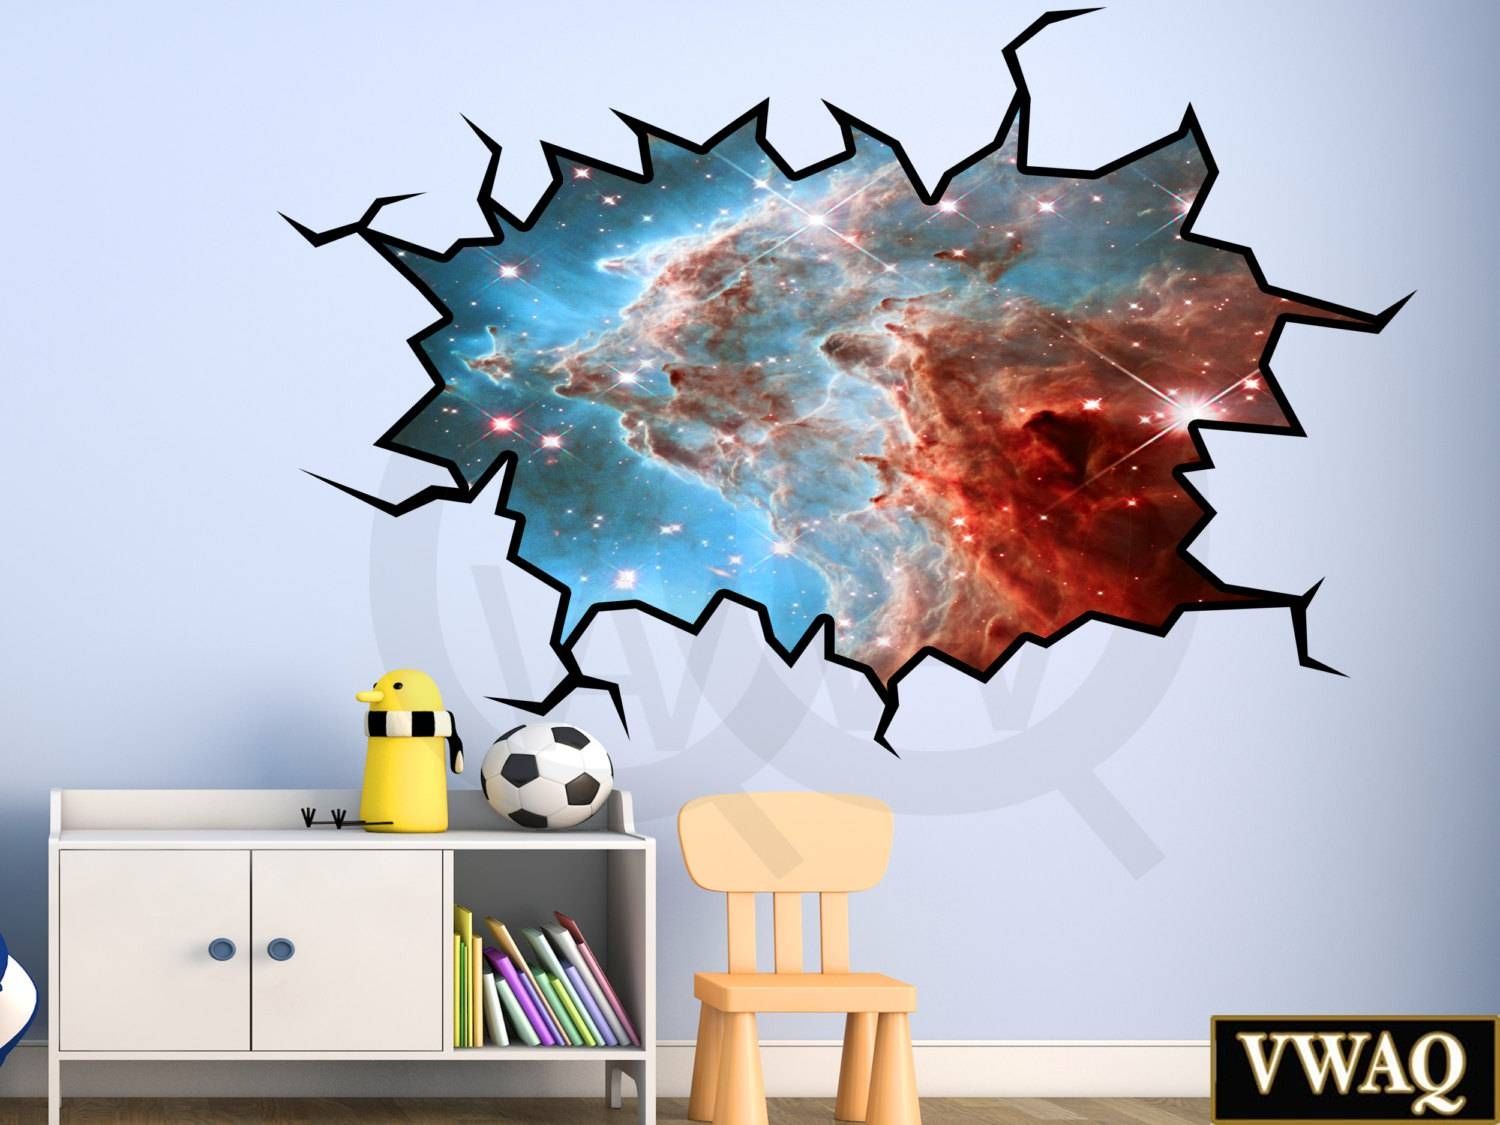 3d Wall Decal Outer Space Decal Galaxy 3d Wall Sticker Vinyl Intended For 2017 Decorative 3d Wall Art Stickers (View 7 of 20)